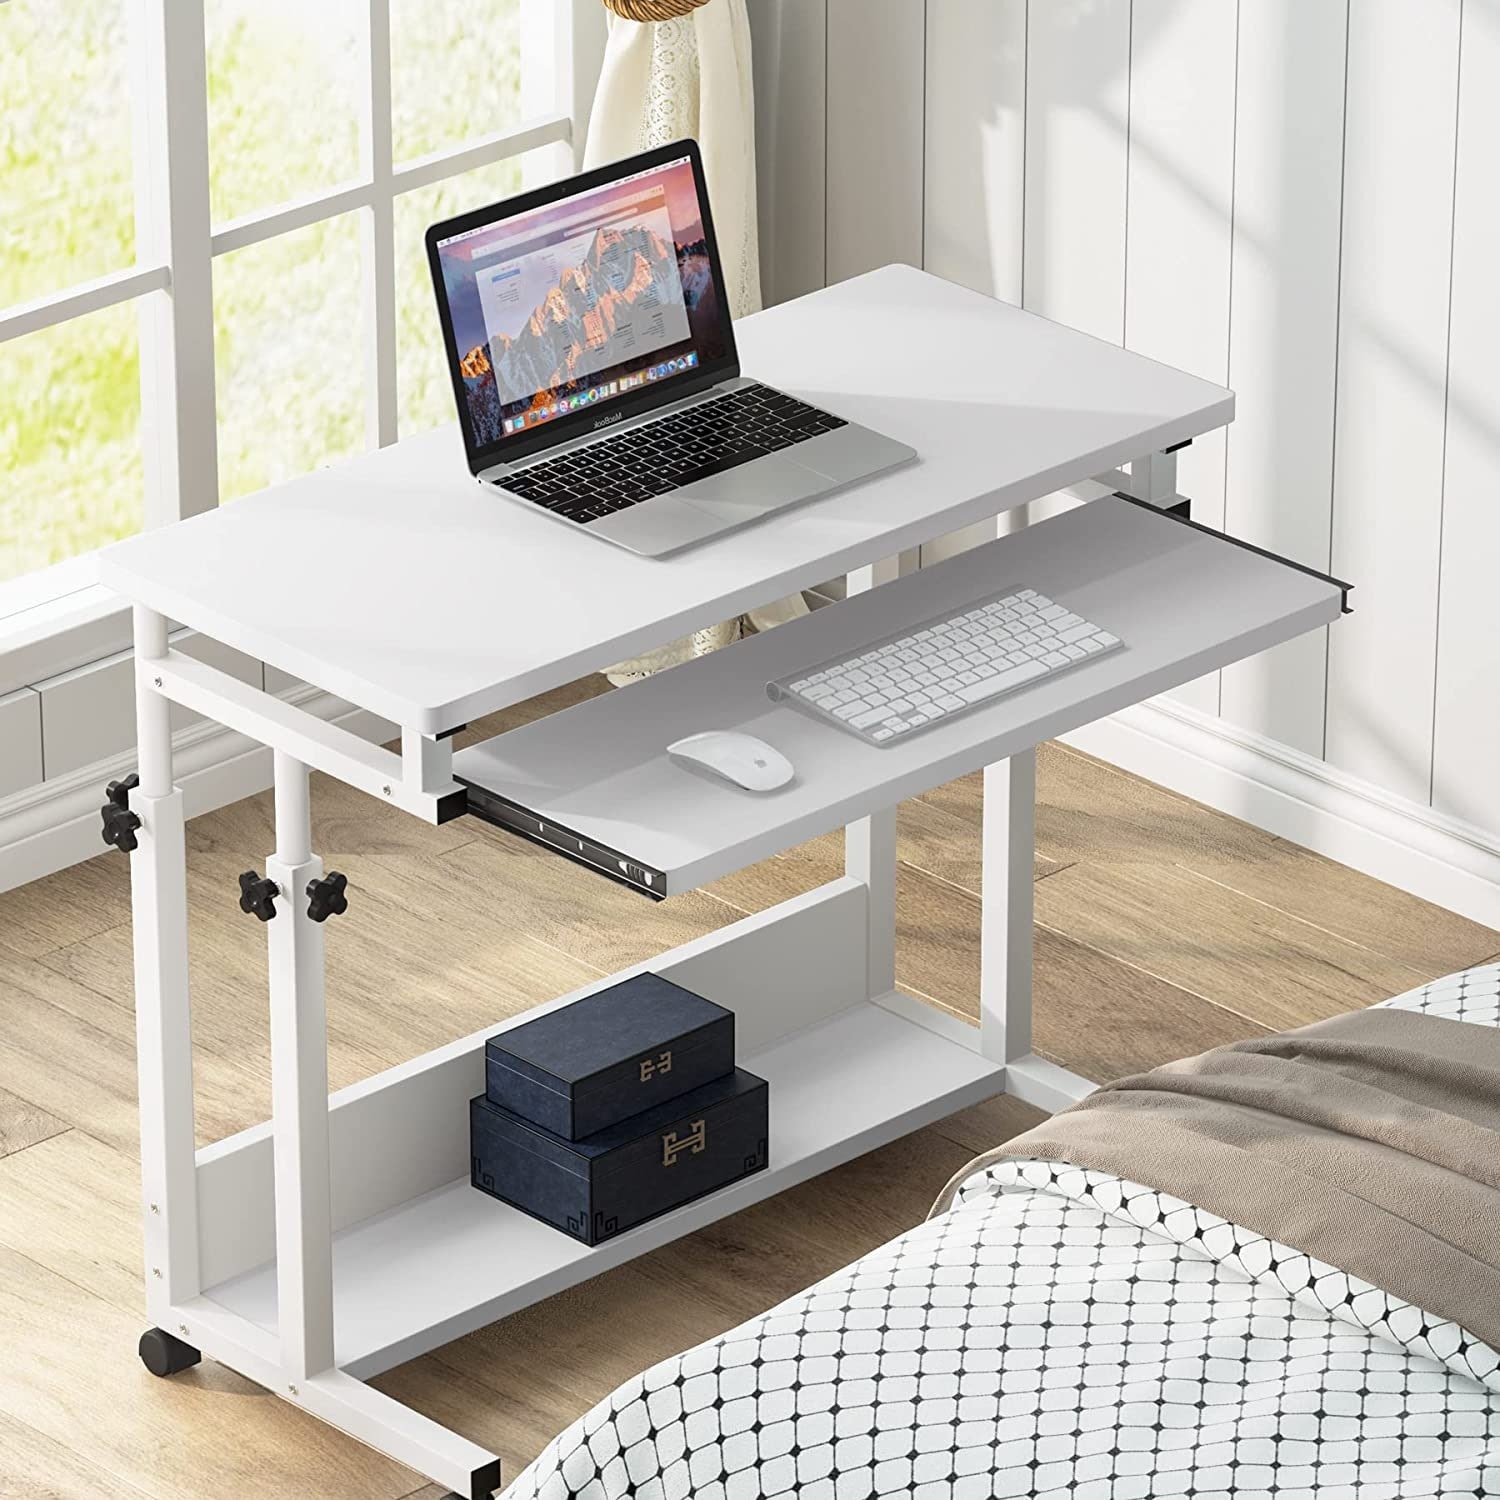 https://ak1.ostkcdn.com/images/products/is/images/direct/35958f9830a38c0179a83bf6b53e8c0860b9dd8e/Portable-Laptop-Desk-for-Sofa-and-Bed%2C-Height-Adjustable-Small-Standing-Table.jpg